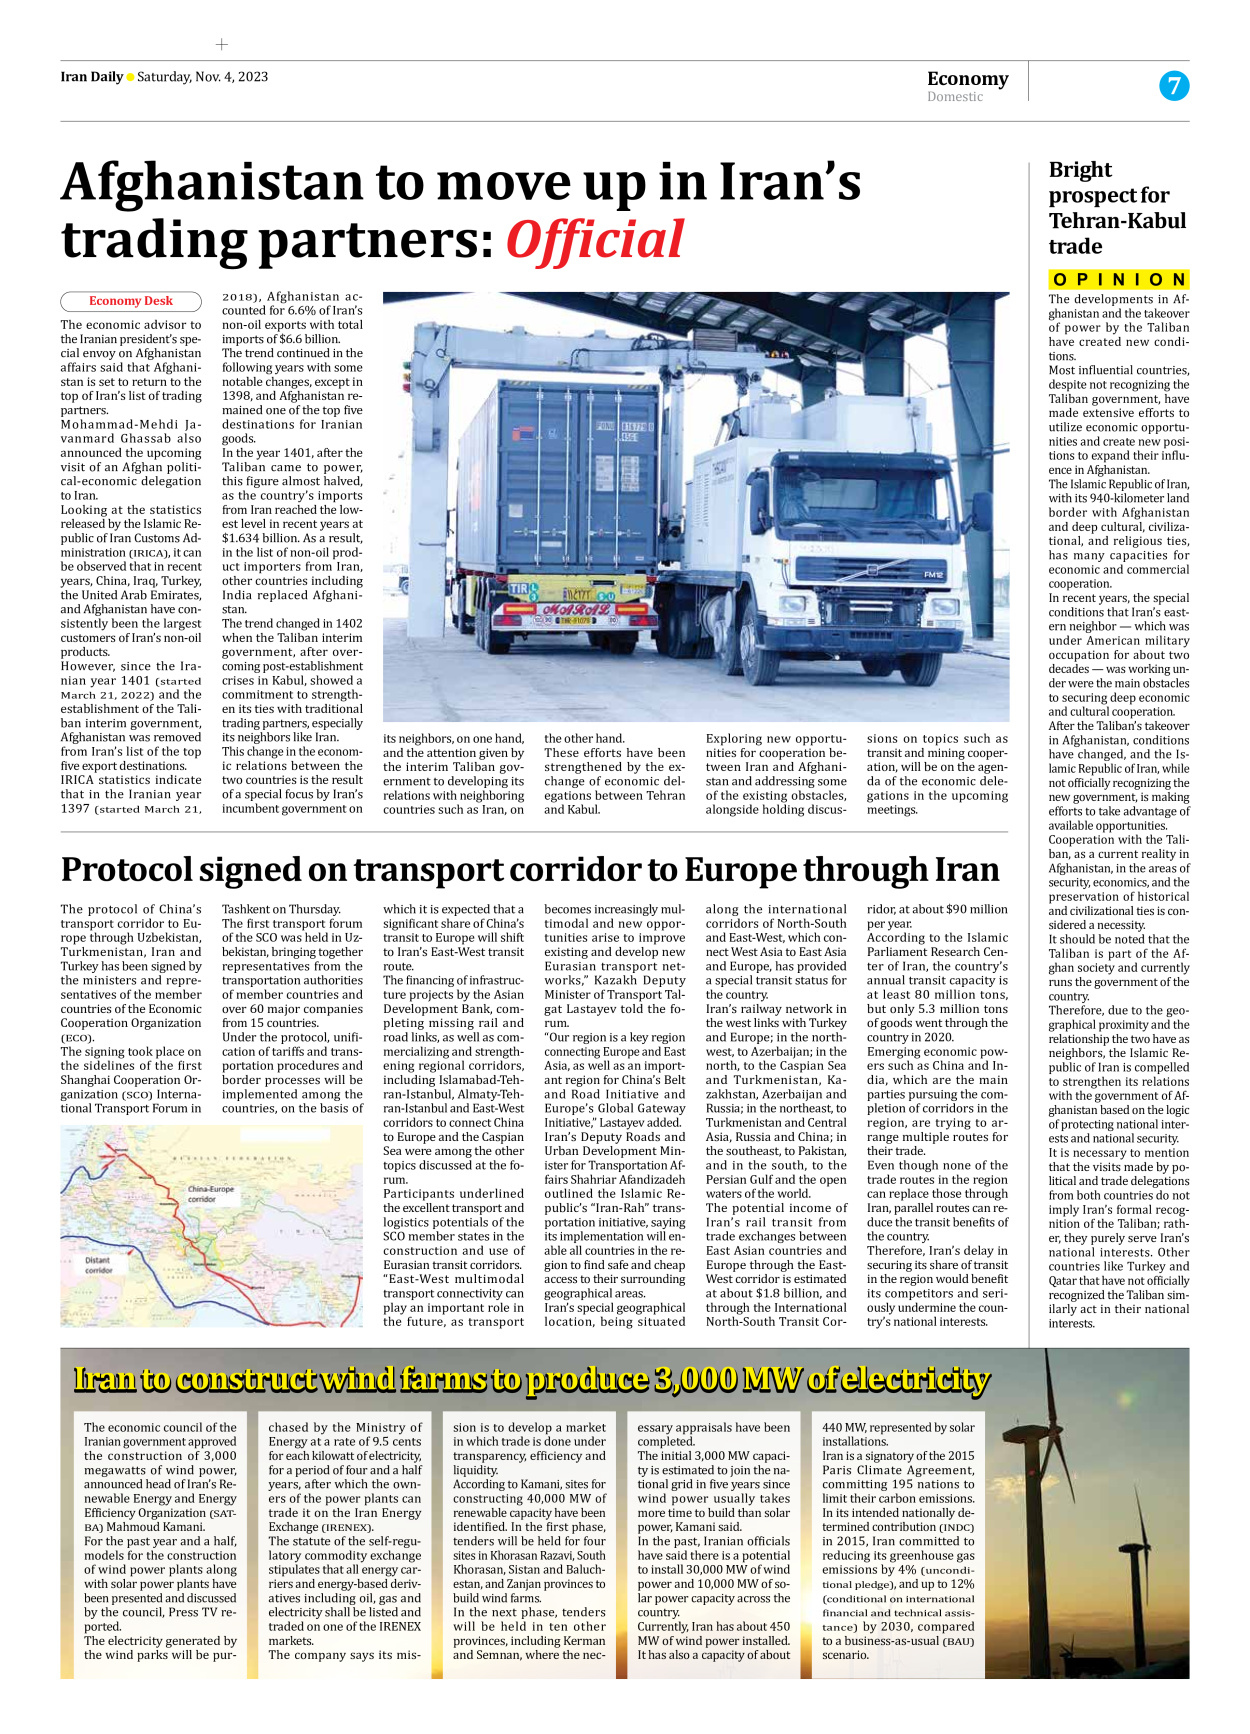 Iran Daily - Number Seven Thousand Four Hundred and Twenty Five - 04 November 2023 - Page 7